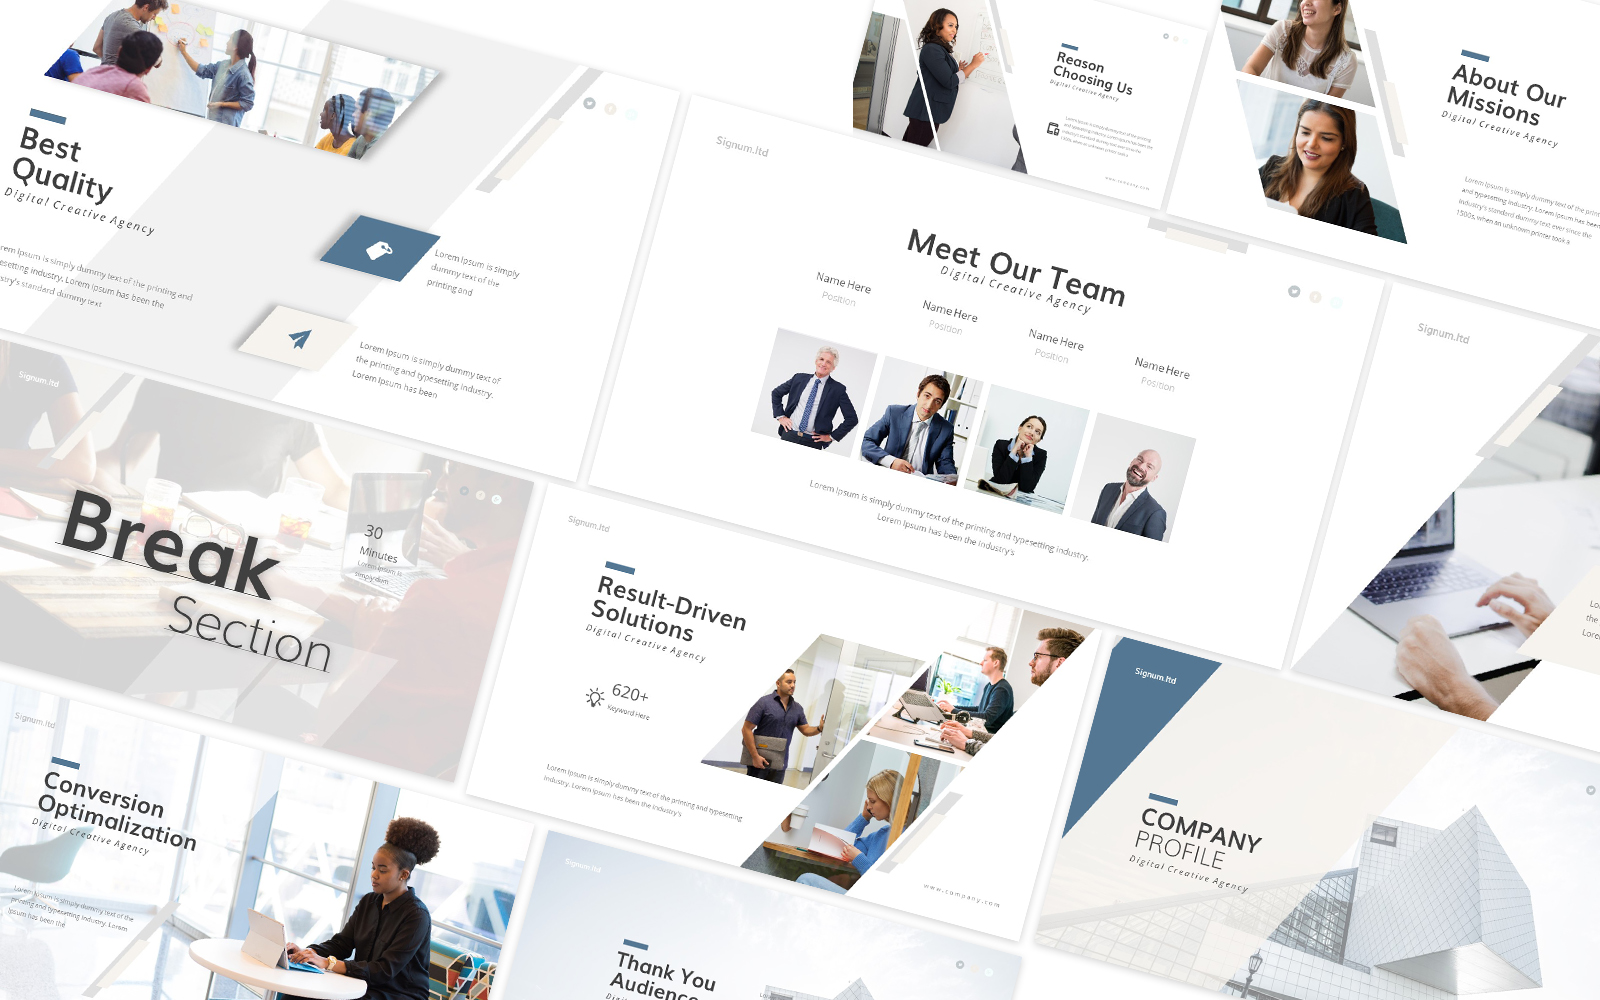 Company Profile 2 Powerpoint Template